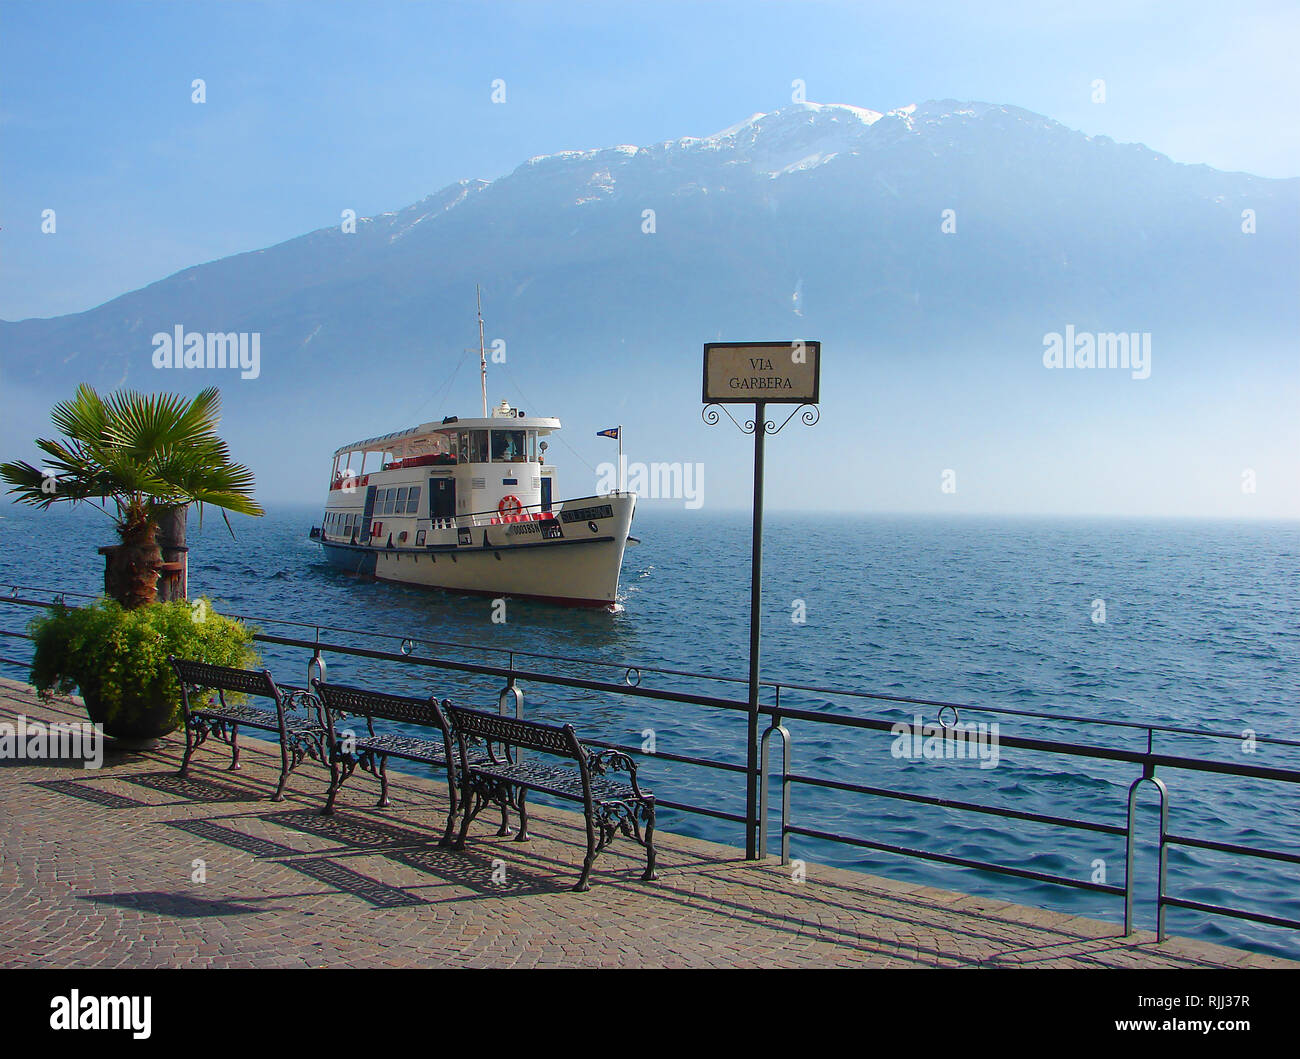 2014 - The launch 'Solferino' arrives  on misty Lake Garda at Via Garbera, Limone sul Garda (Limones / Limone / Limu), in the province of Brescia, in Lombardy (northern Italy). Stock Photo